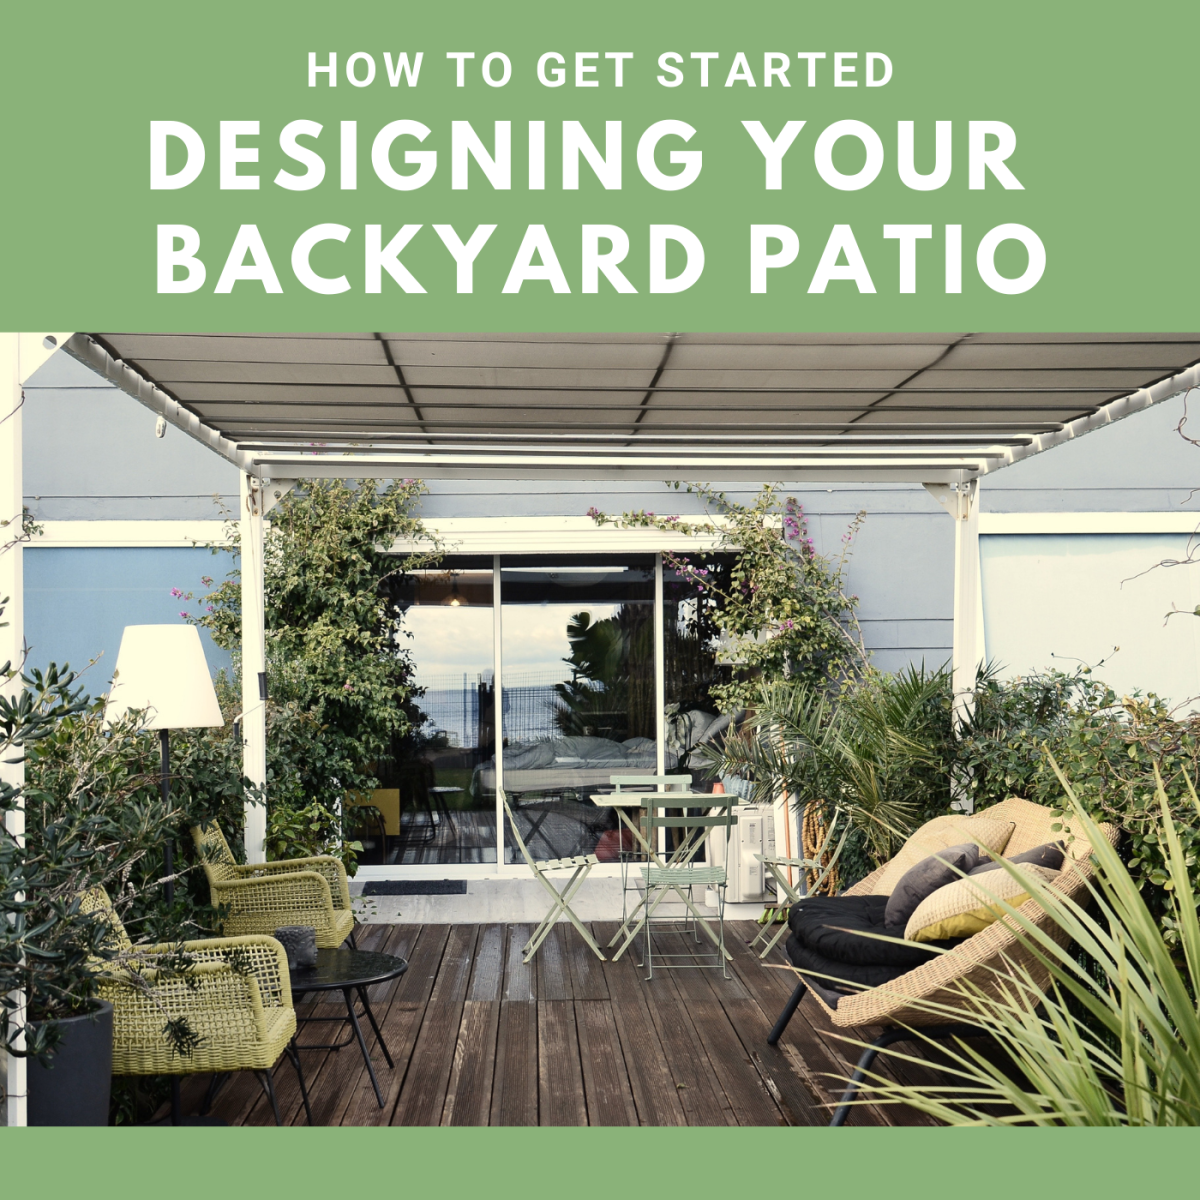 This guide will provide you with all the basic information you need to get started designing your backyard patio.